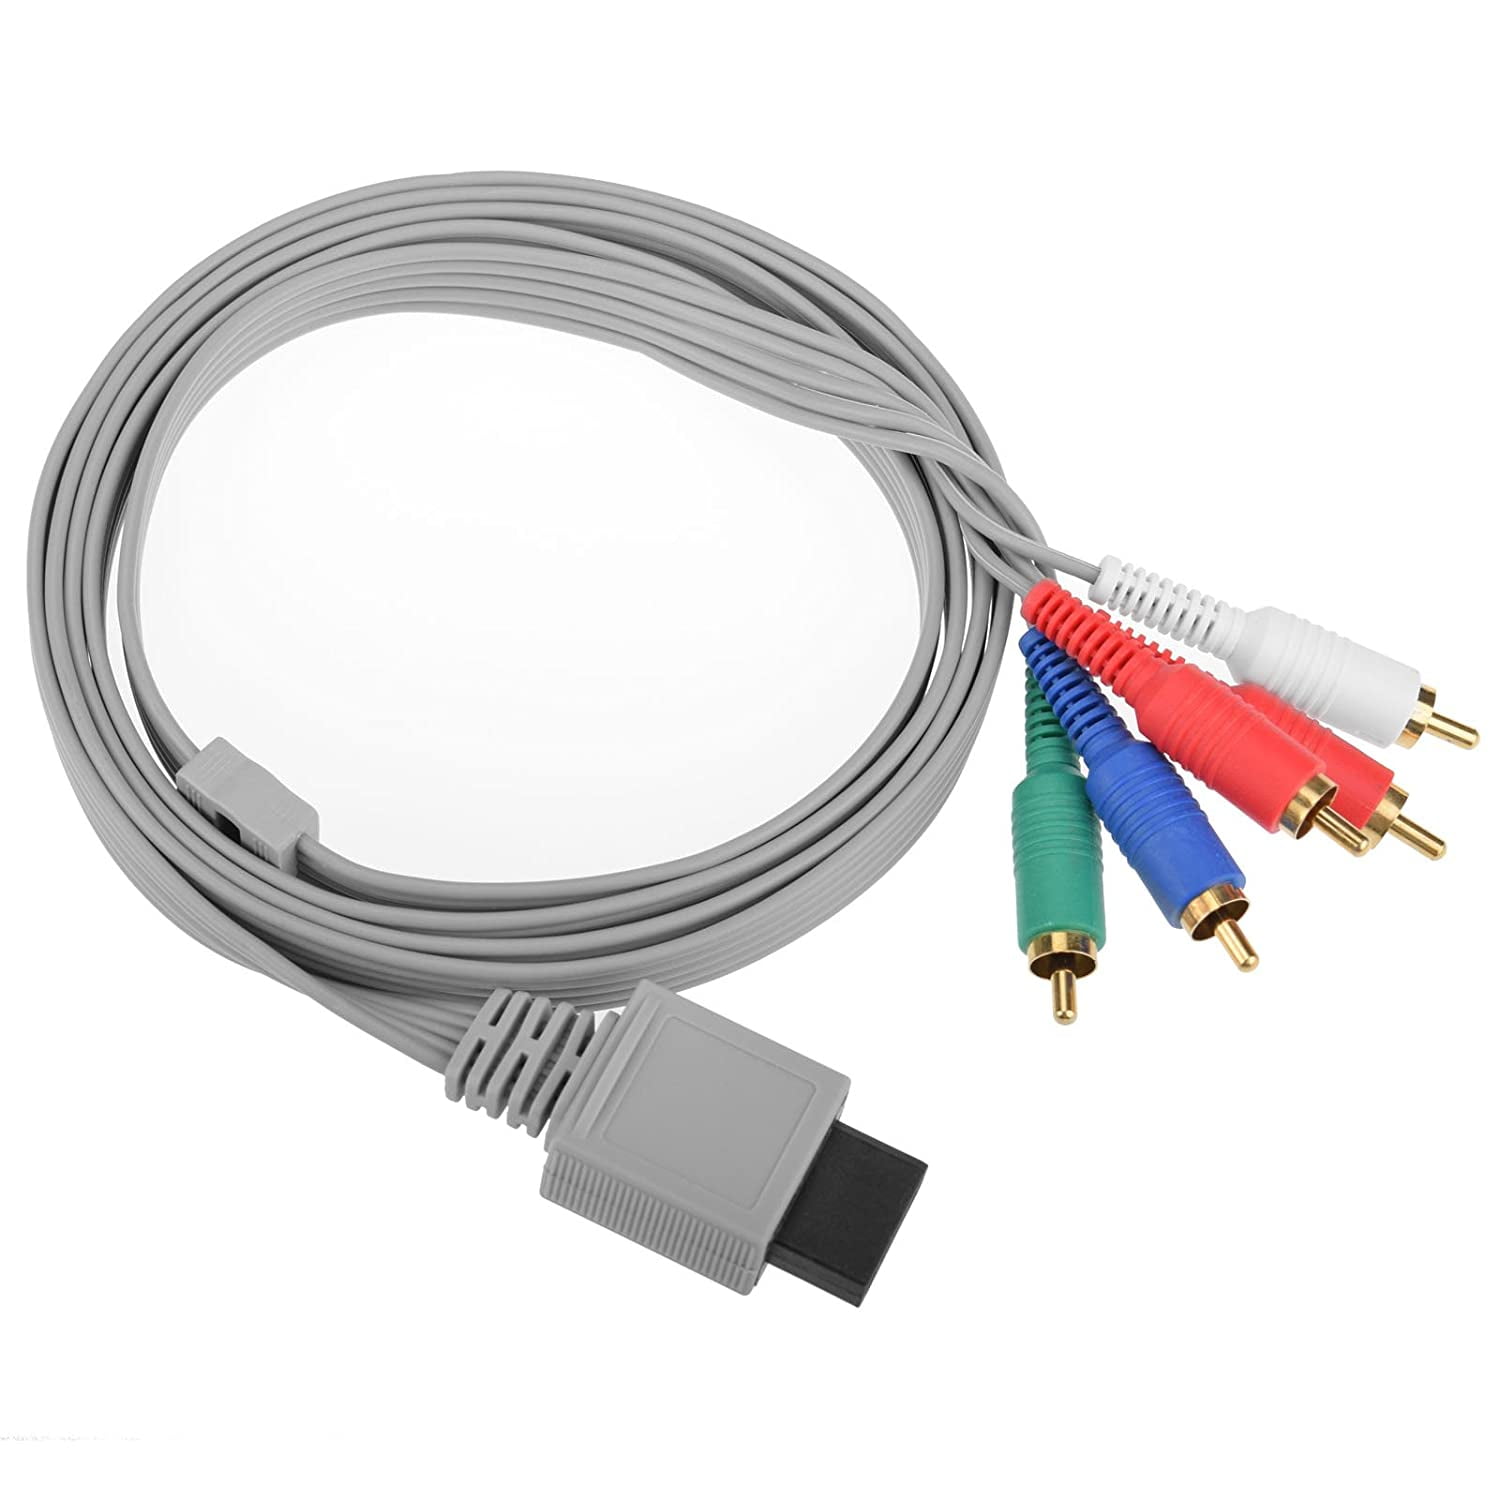 Component HDTV AV Audio Video Component Cable for Nintendo Wii